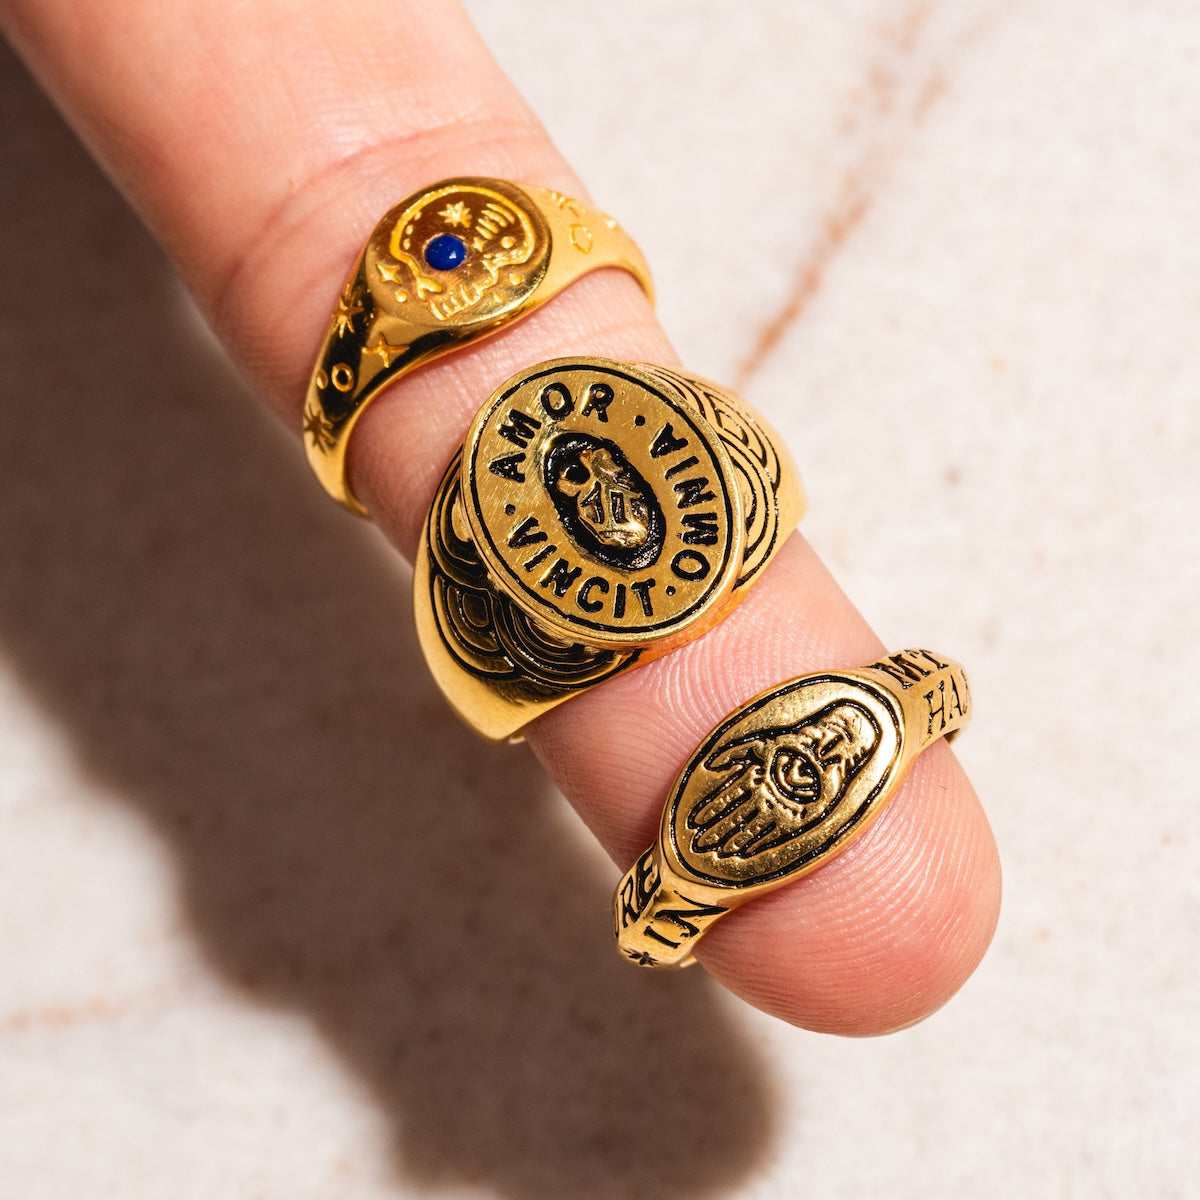 Future In My Hands Signet Ring